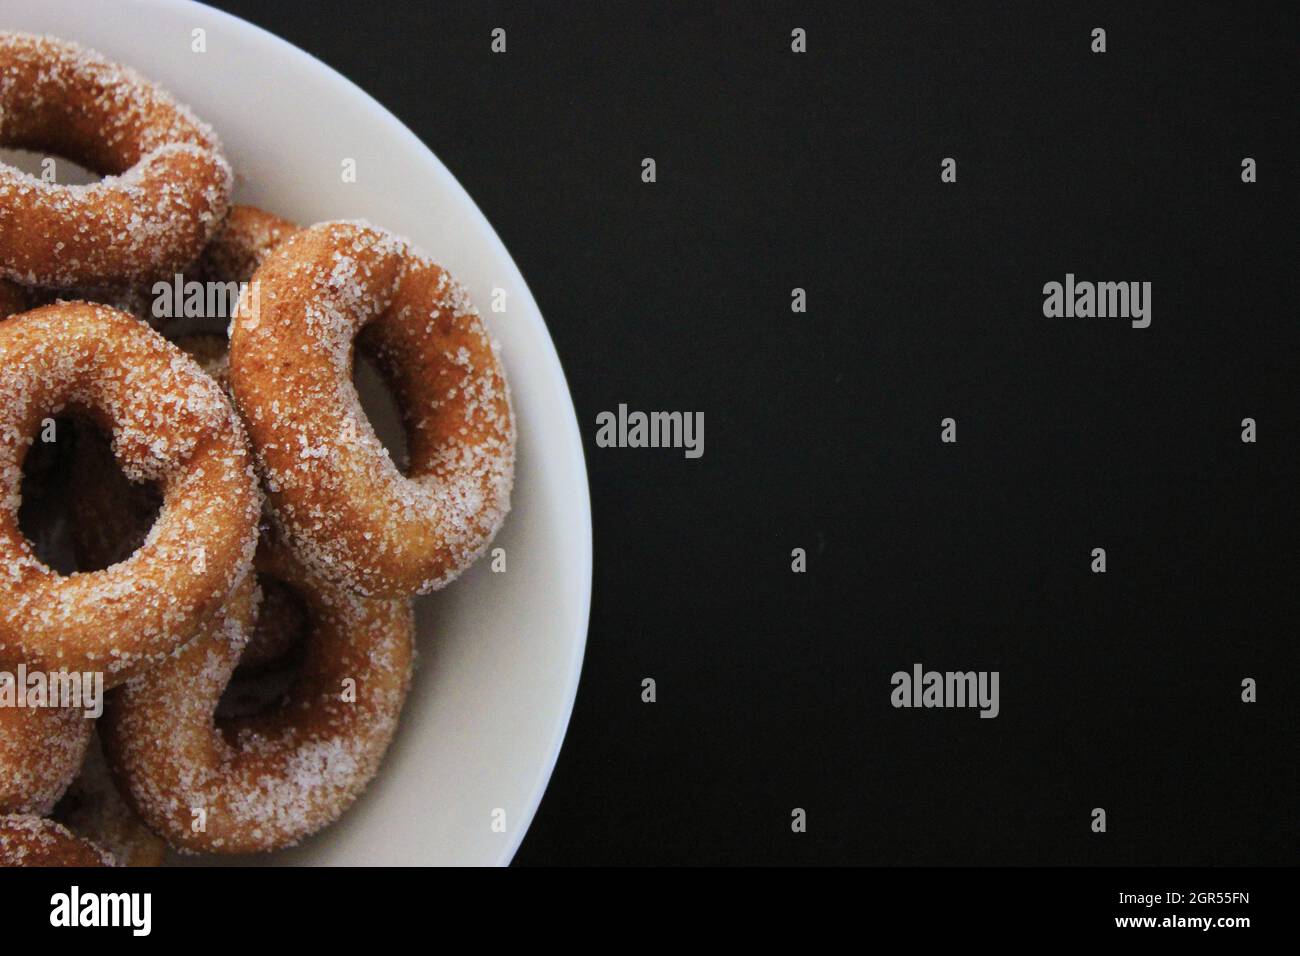 High Angle View Of Donuts In Plate On Table Stock Photo